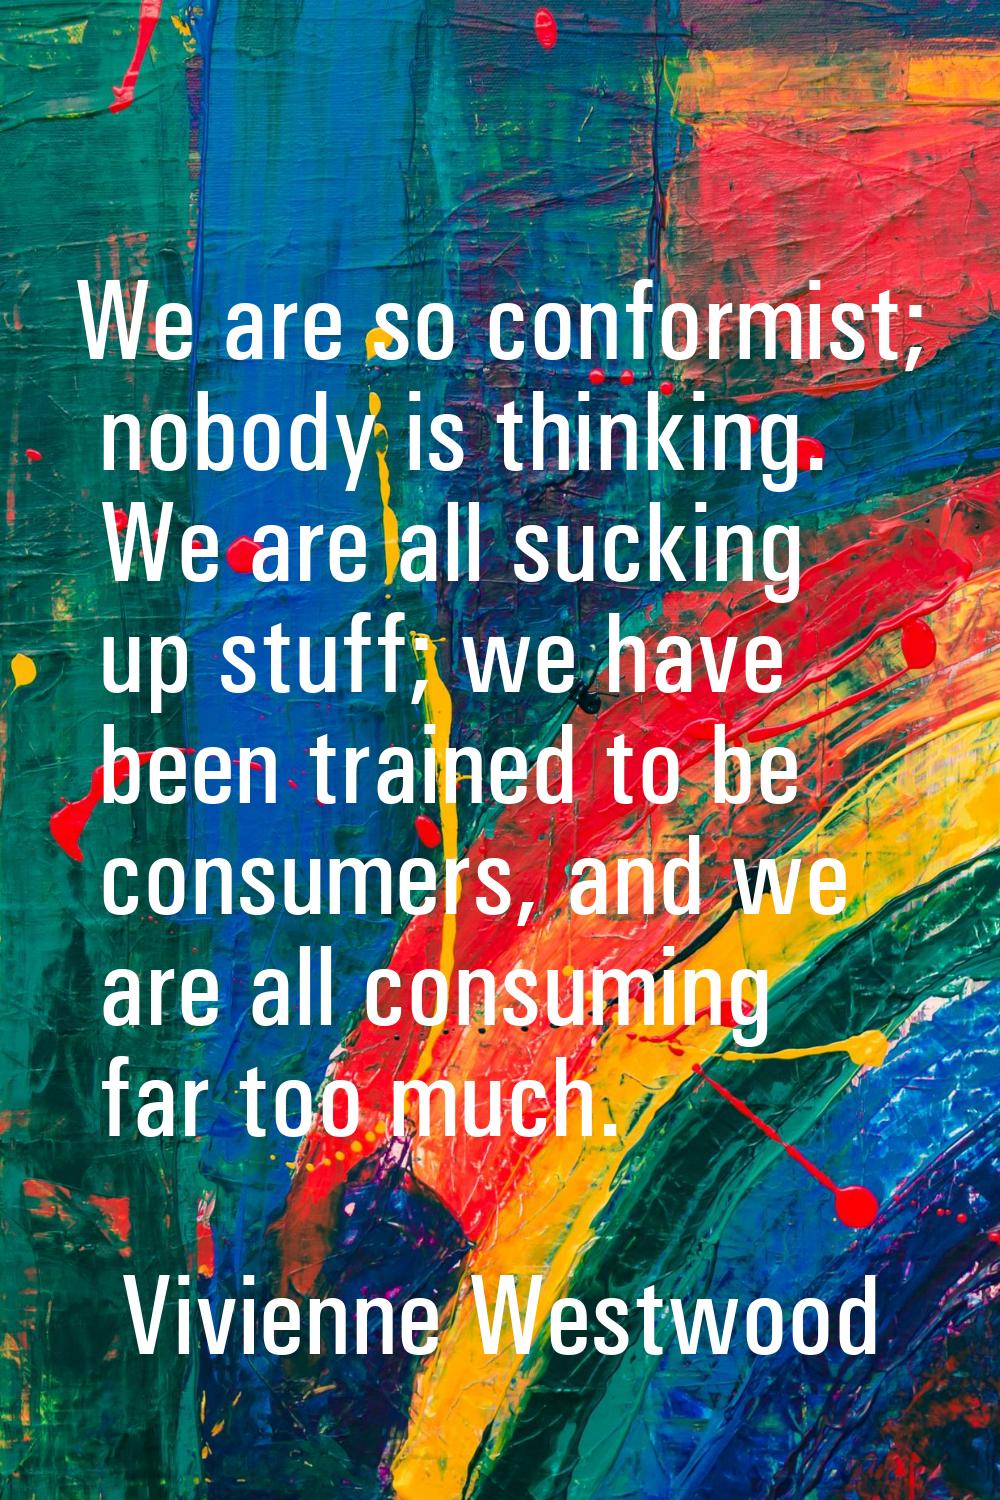 We are so conformist; nobody is thinking. We are all sucking up stuff; we have been trained to be c